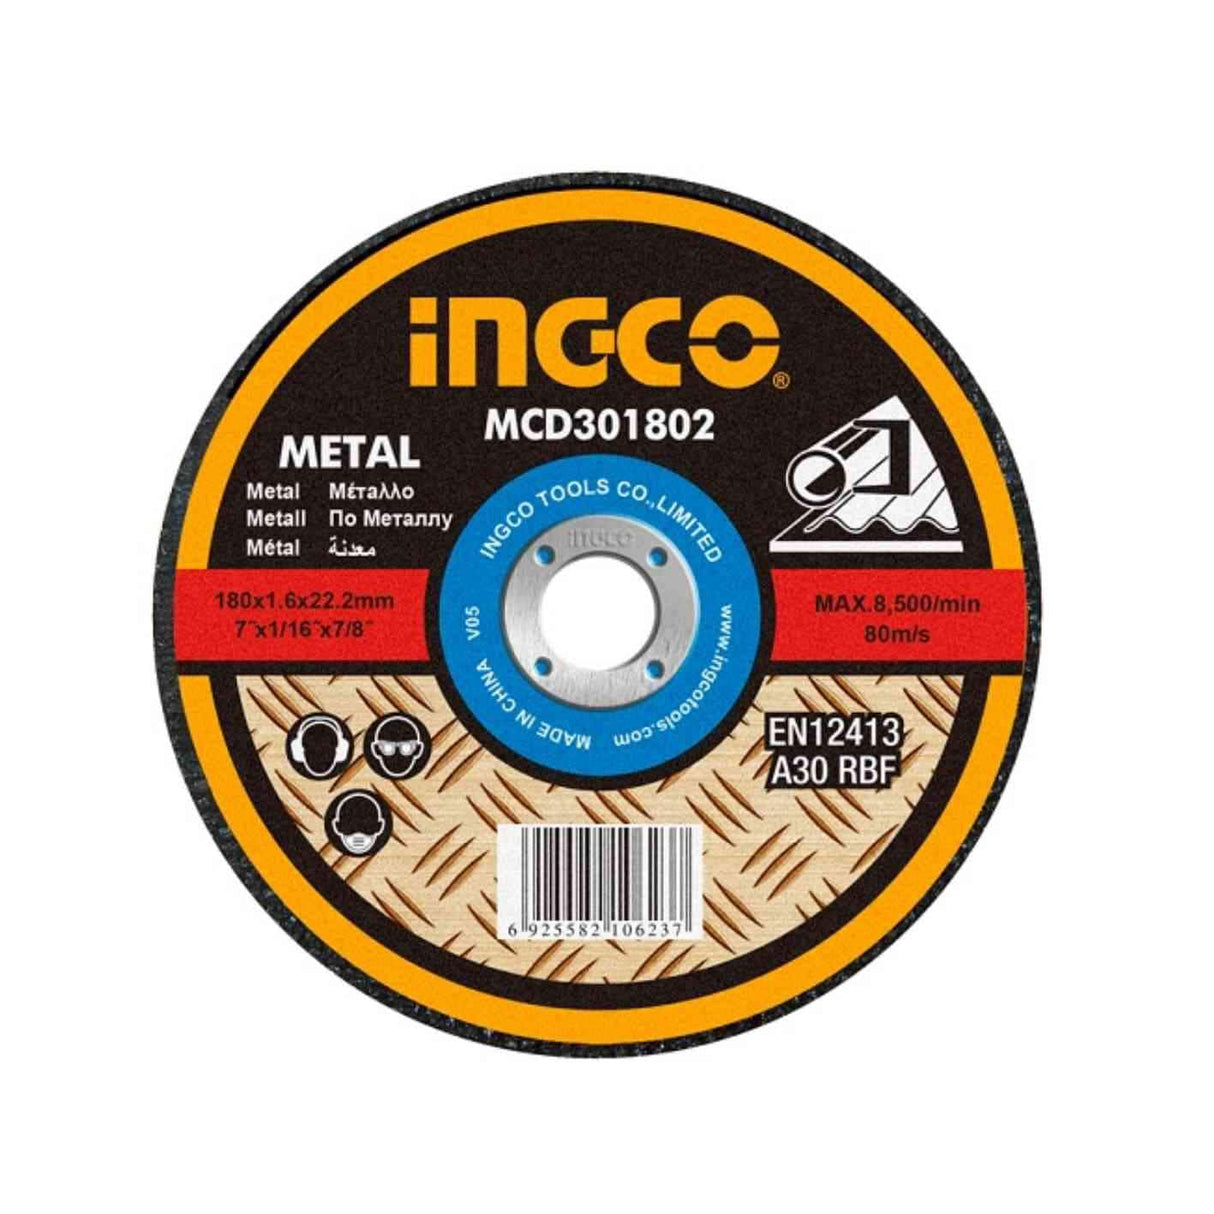 Ingco Abrasive Metal Cutting Disc | Supply Master | Accra, Ghana Tools 180mmx1.6mm Building Steel Engineering Hardware tool